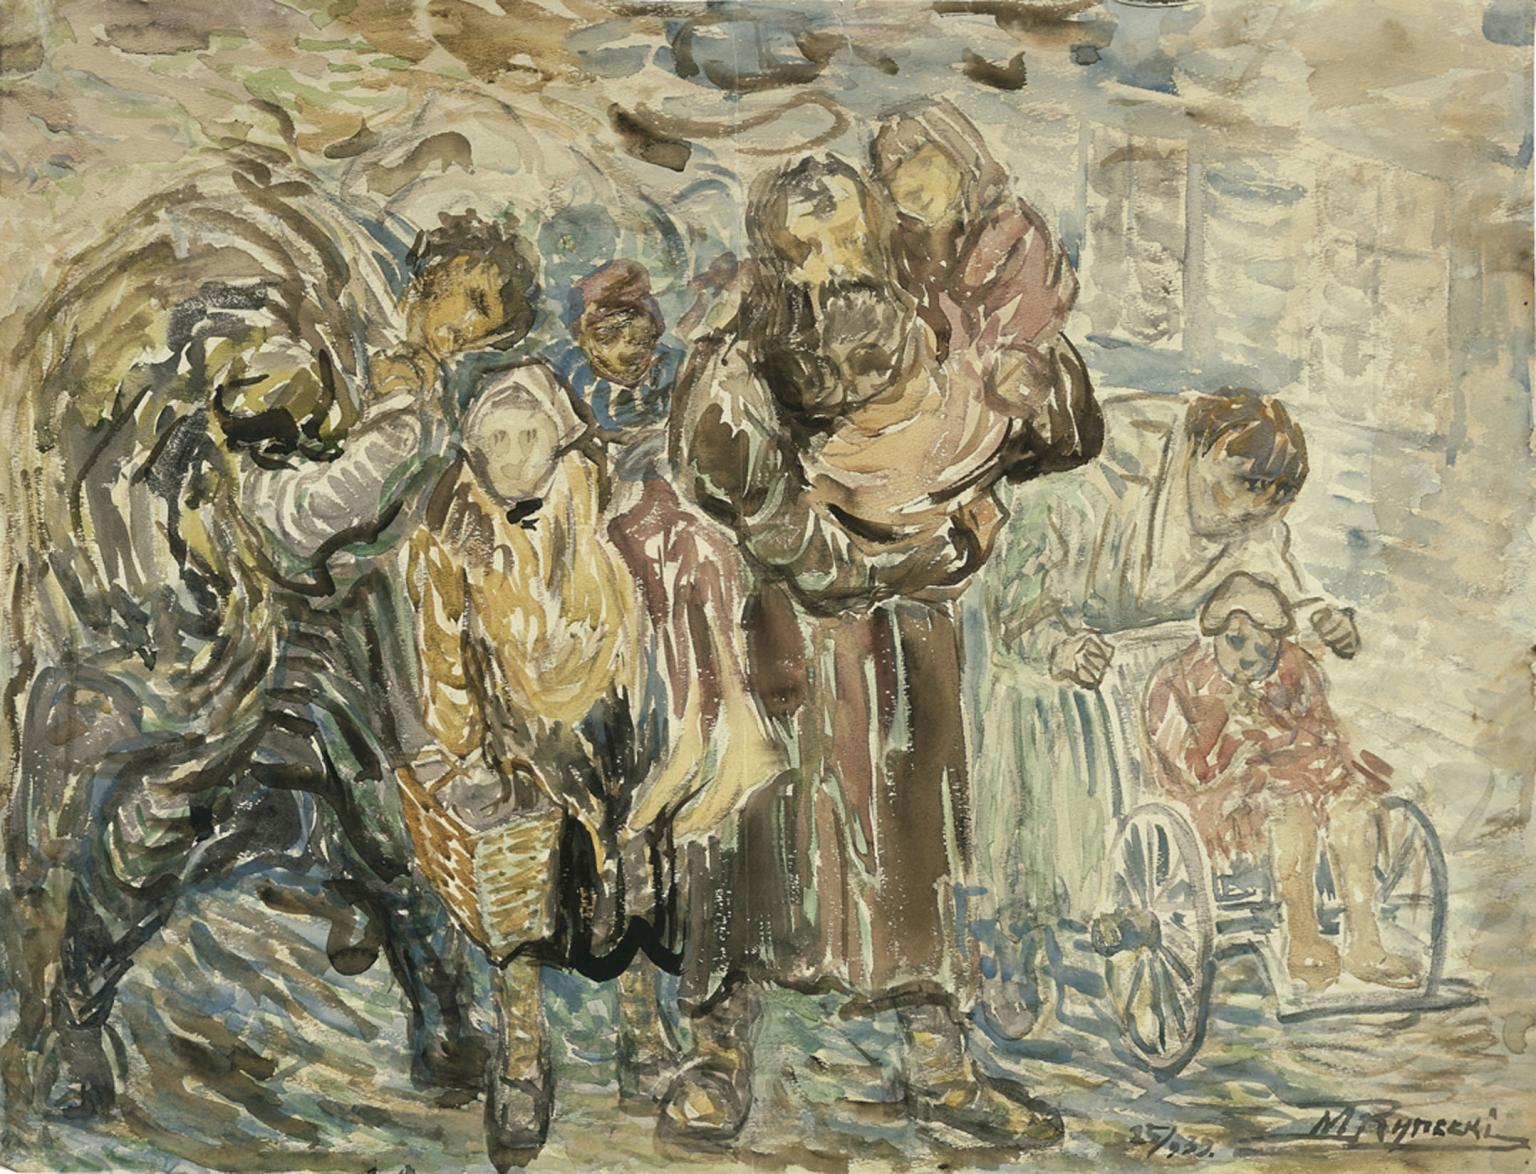 Painting of women, men, and children crowded together.